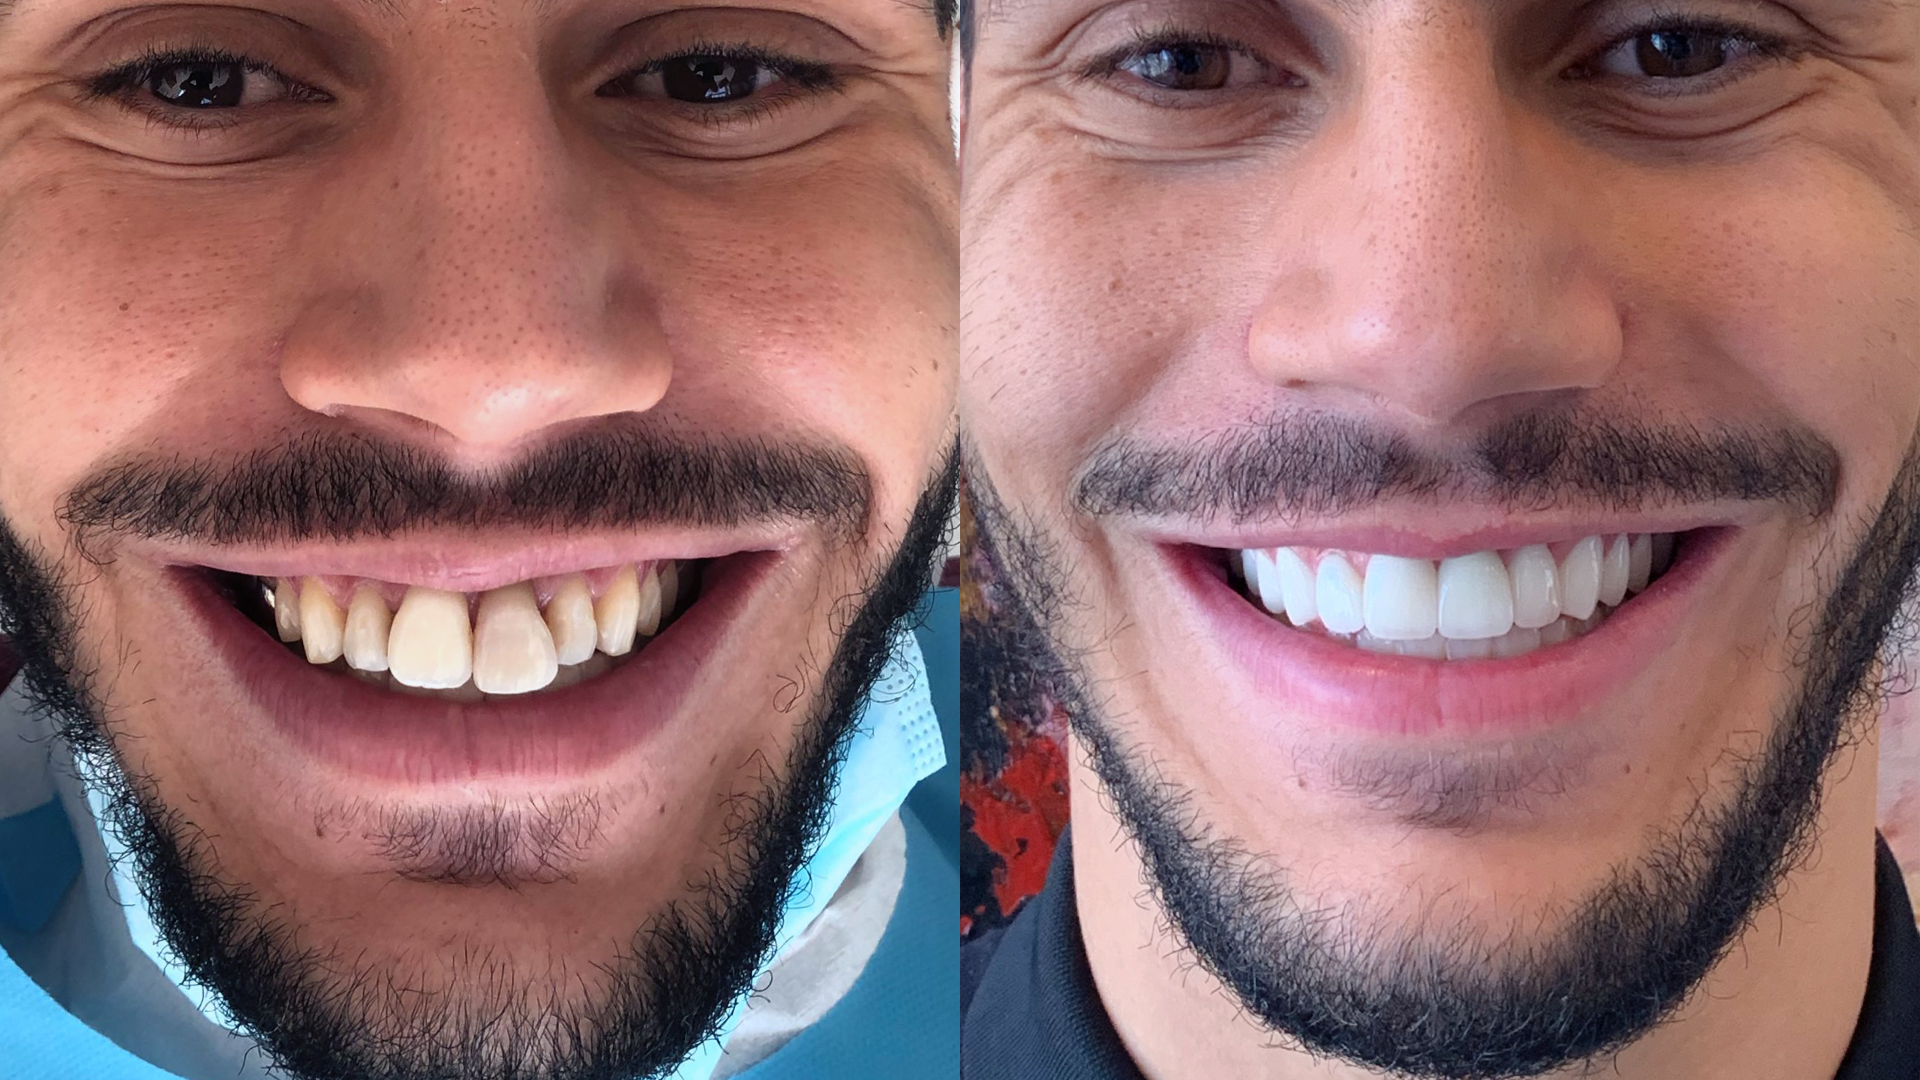 An example of a dental bone grafting with dental implants and veneers